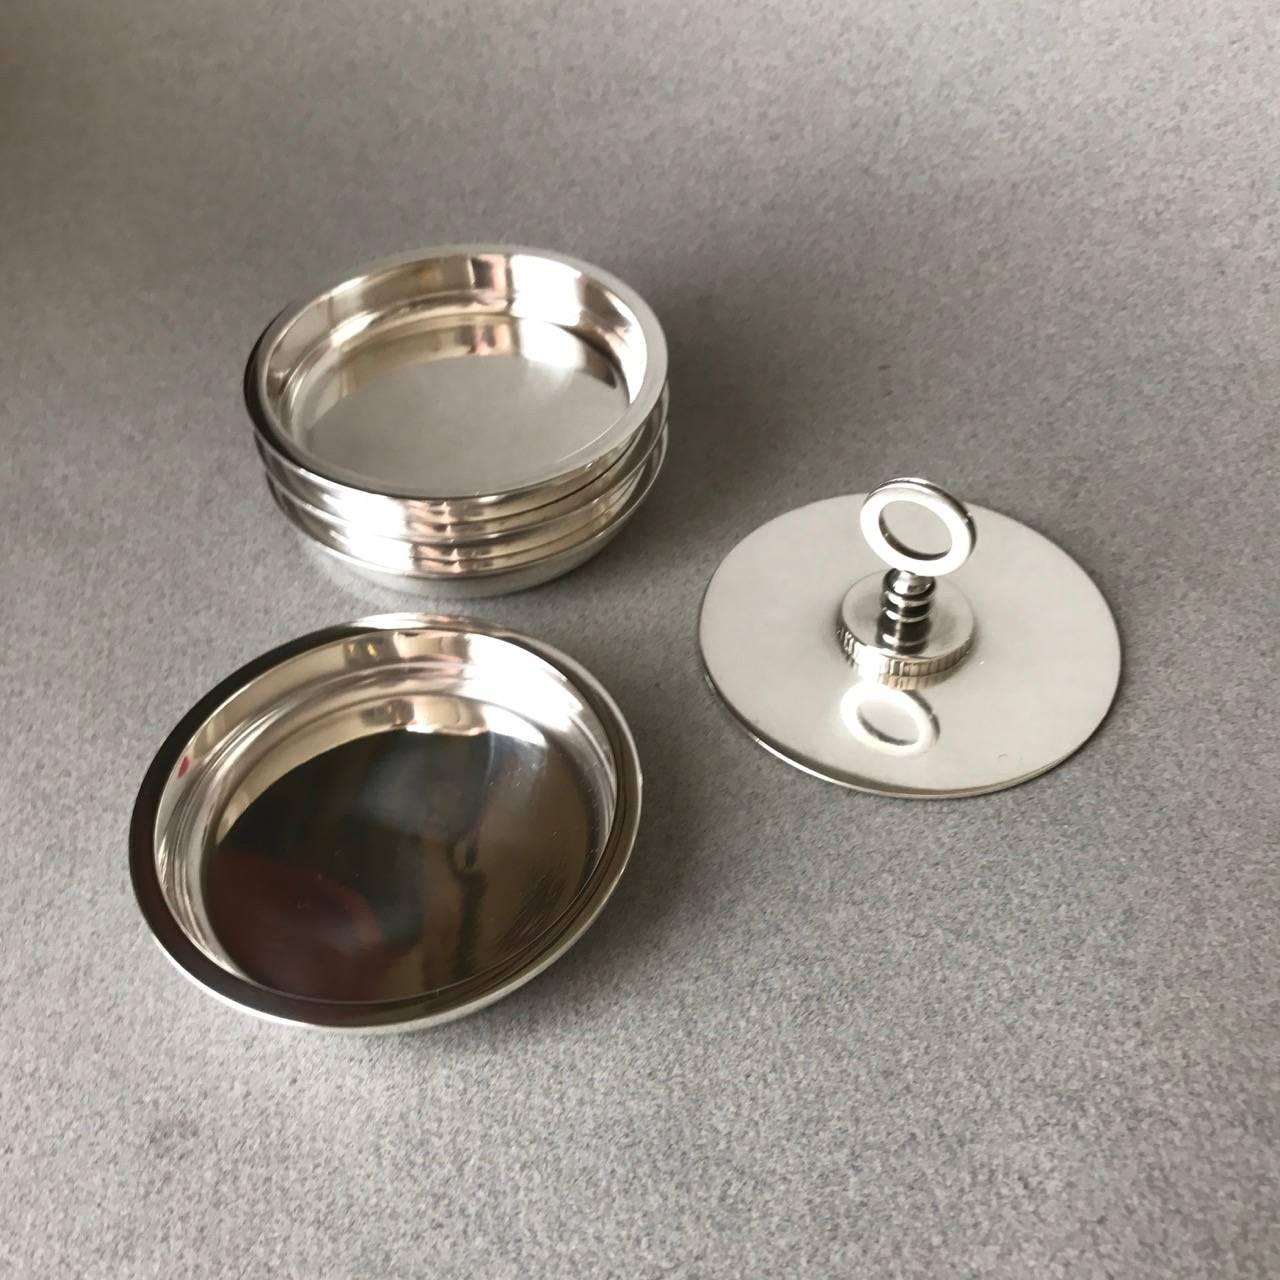 Georg Jensen Sterling Silver Coaster/Nut Set, No. 817 In Excellent Condition For Sale In San Francisco, CA